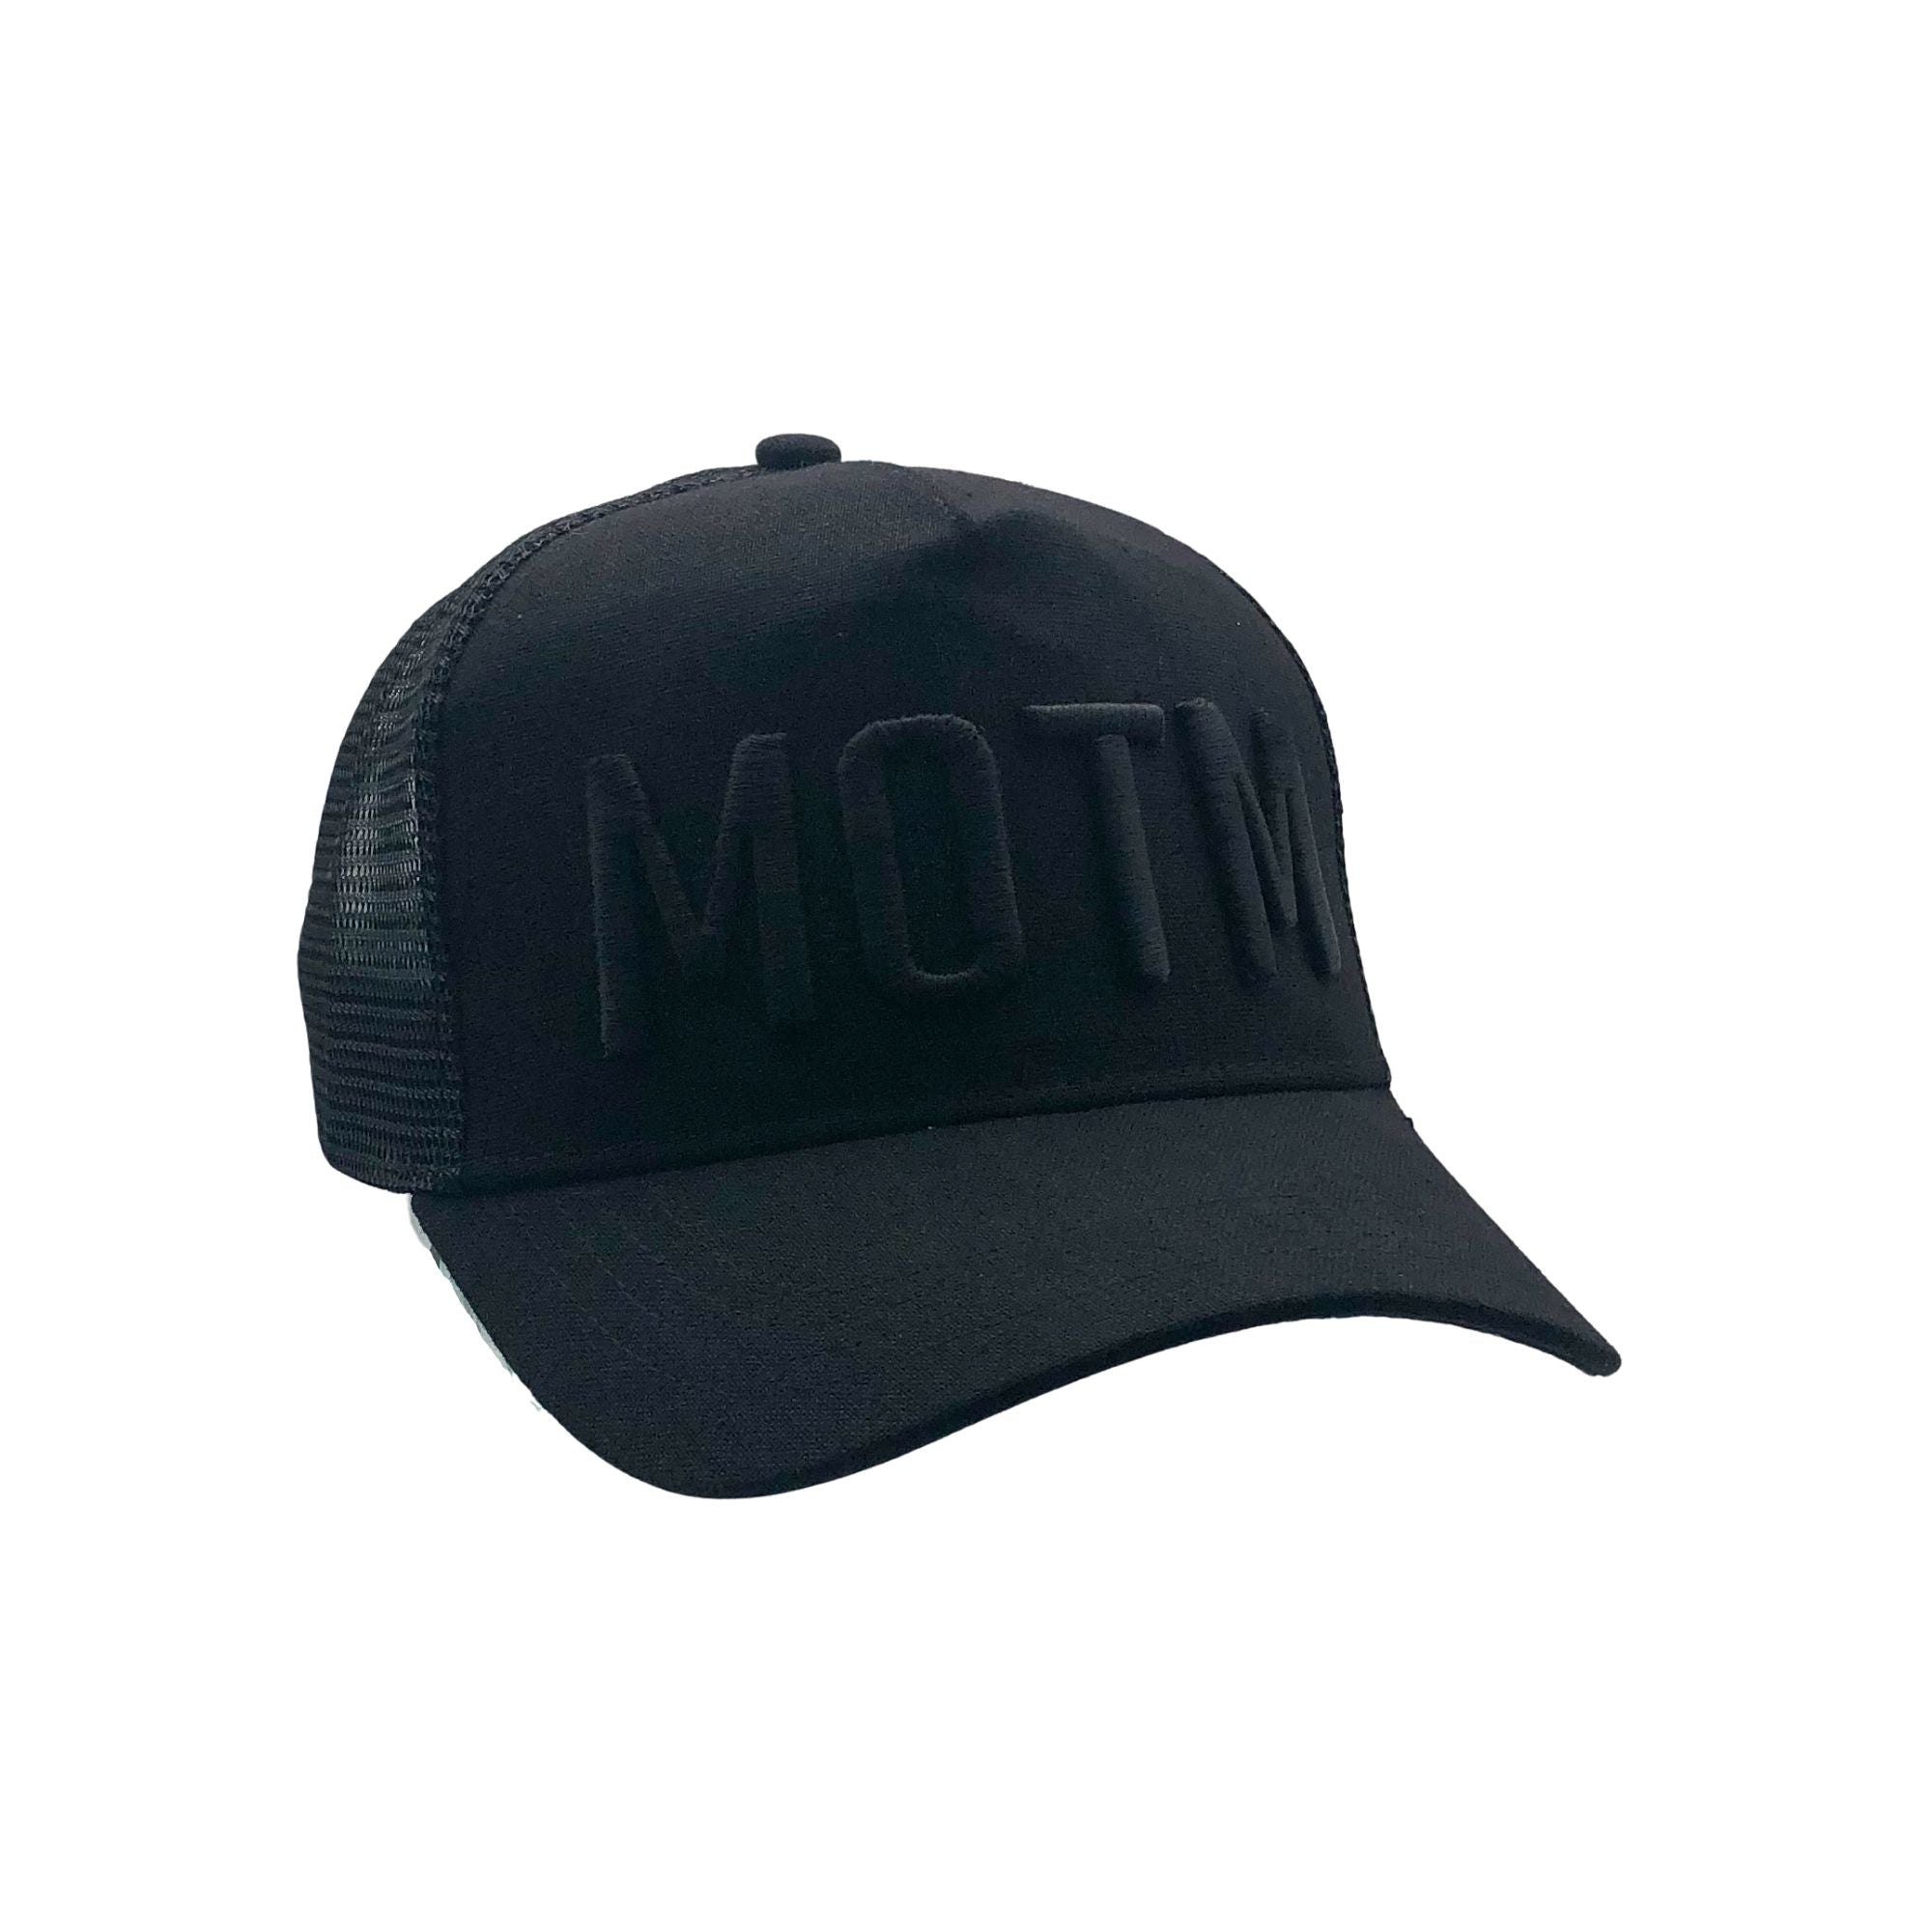 MAN OF THE MATCH® Roberto Carlos Official Cap - MOTM 3D Embroidered Bl